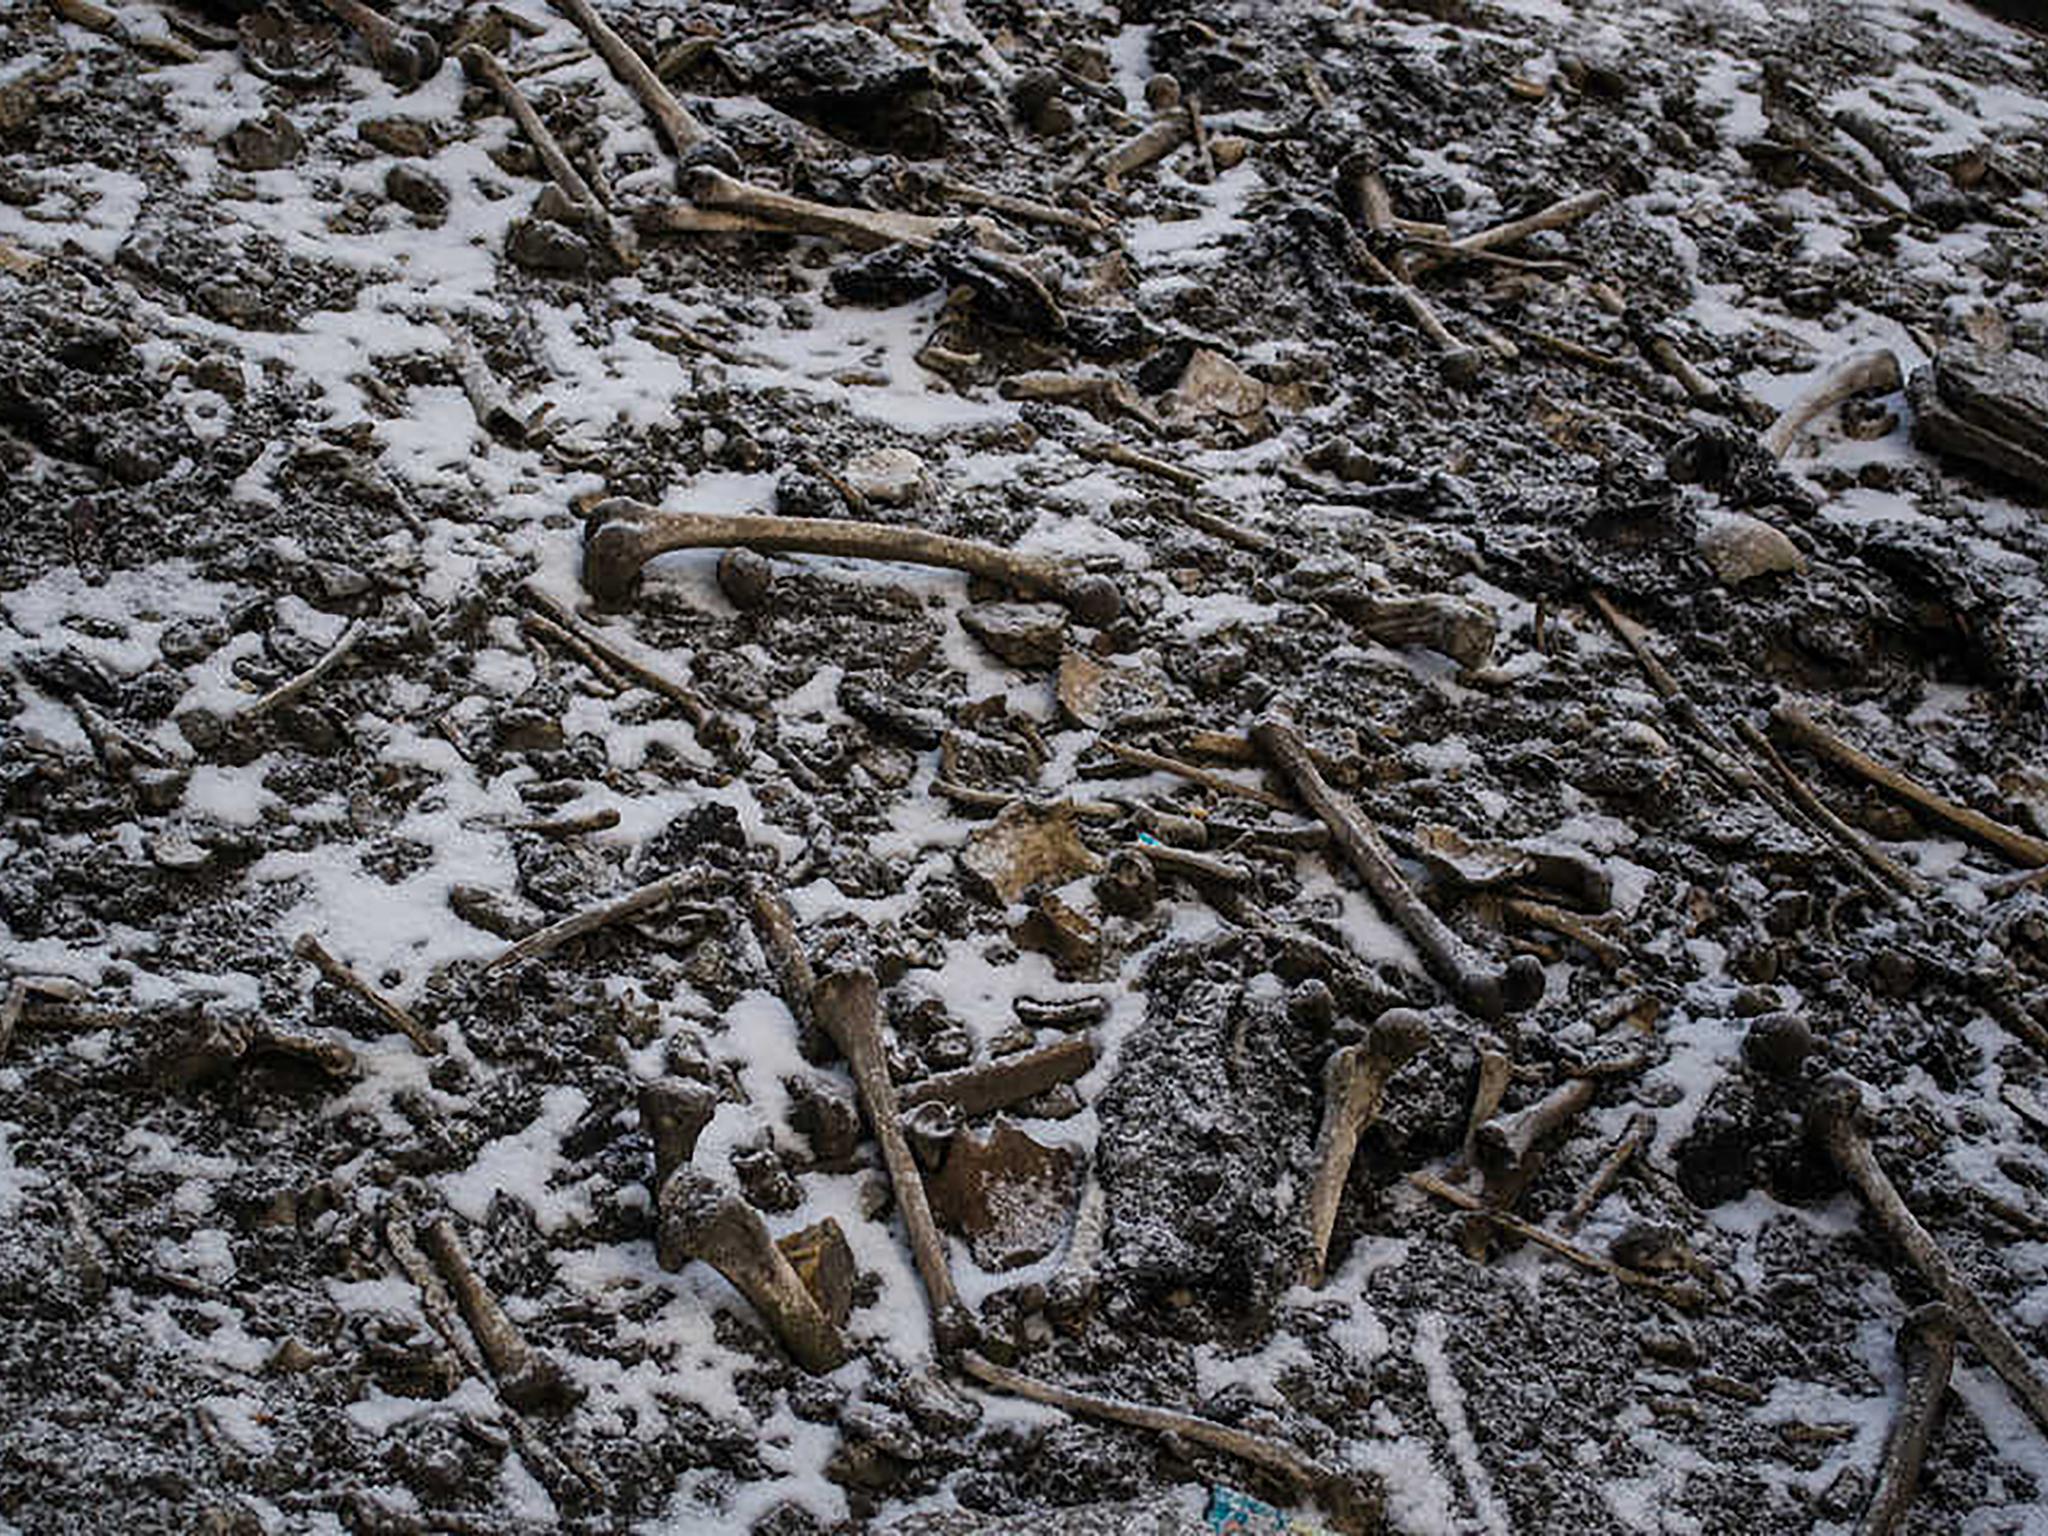 Among the skeletons were 23 males and 15 females